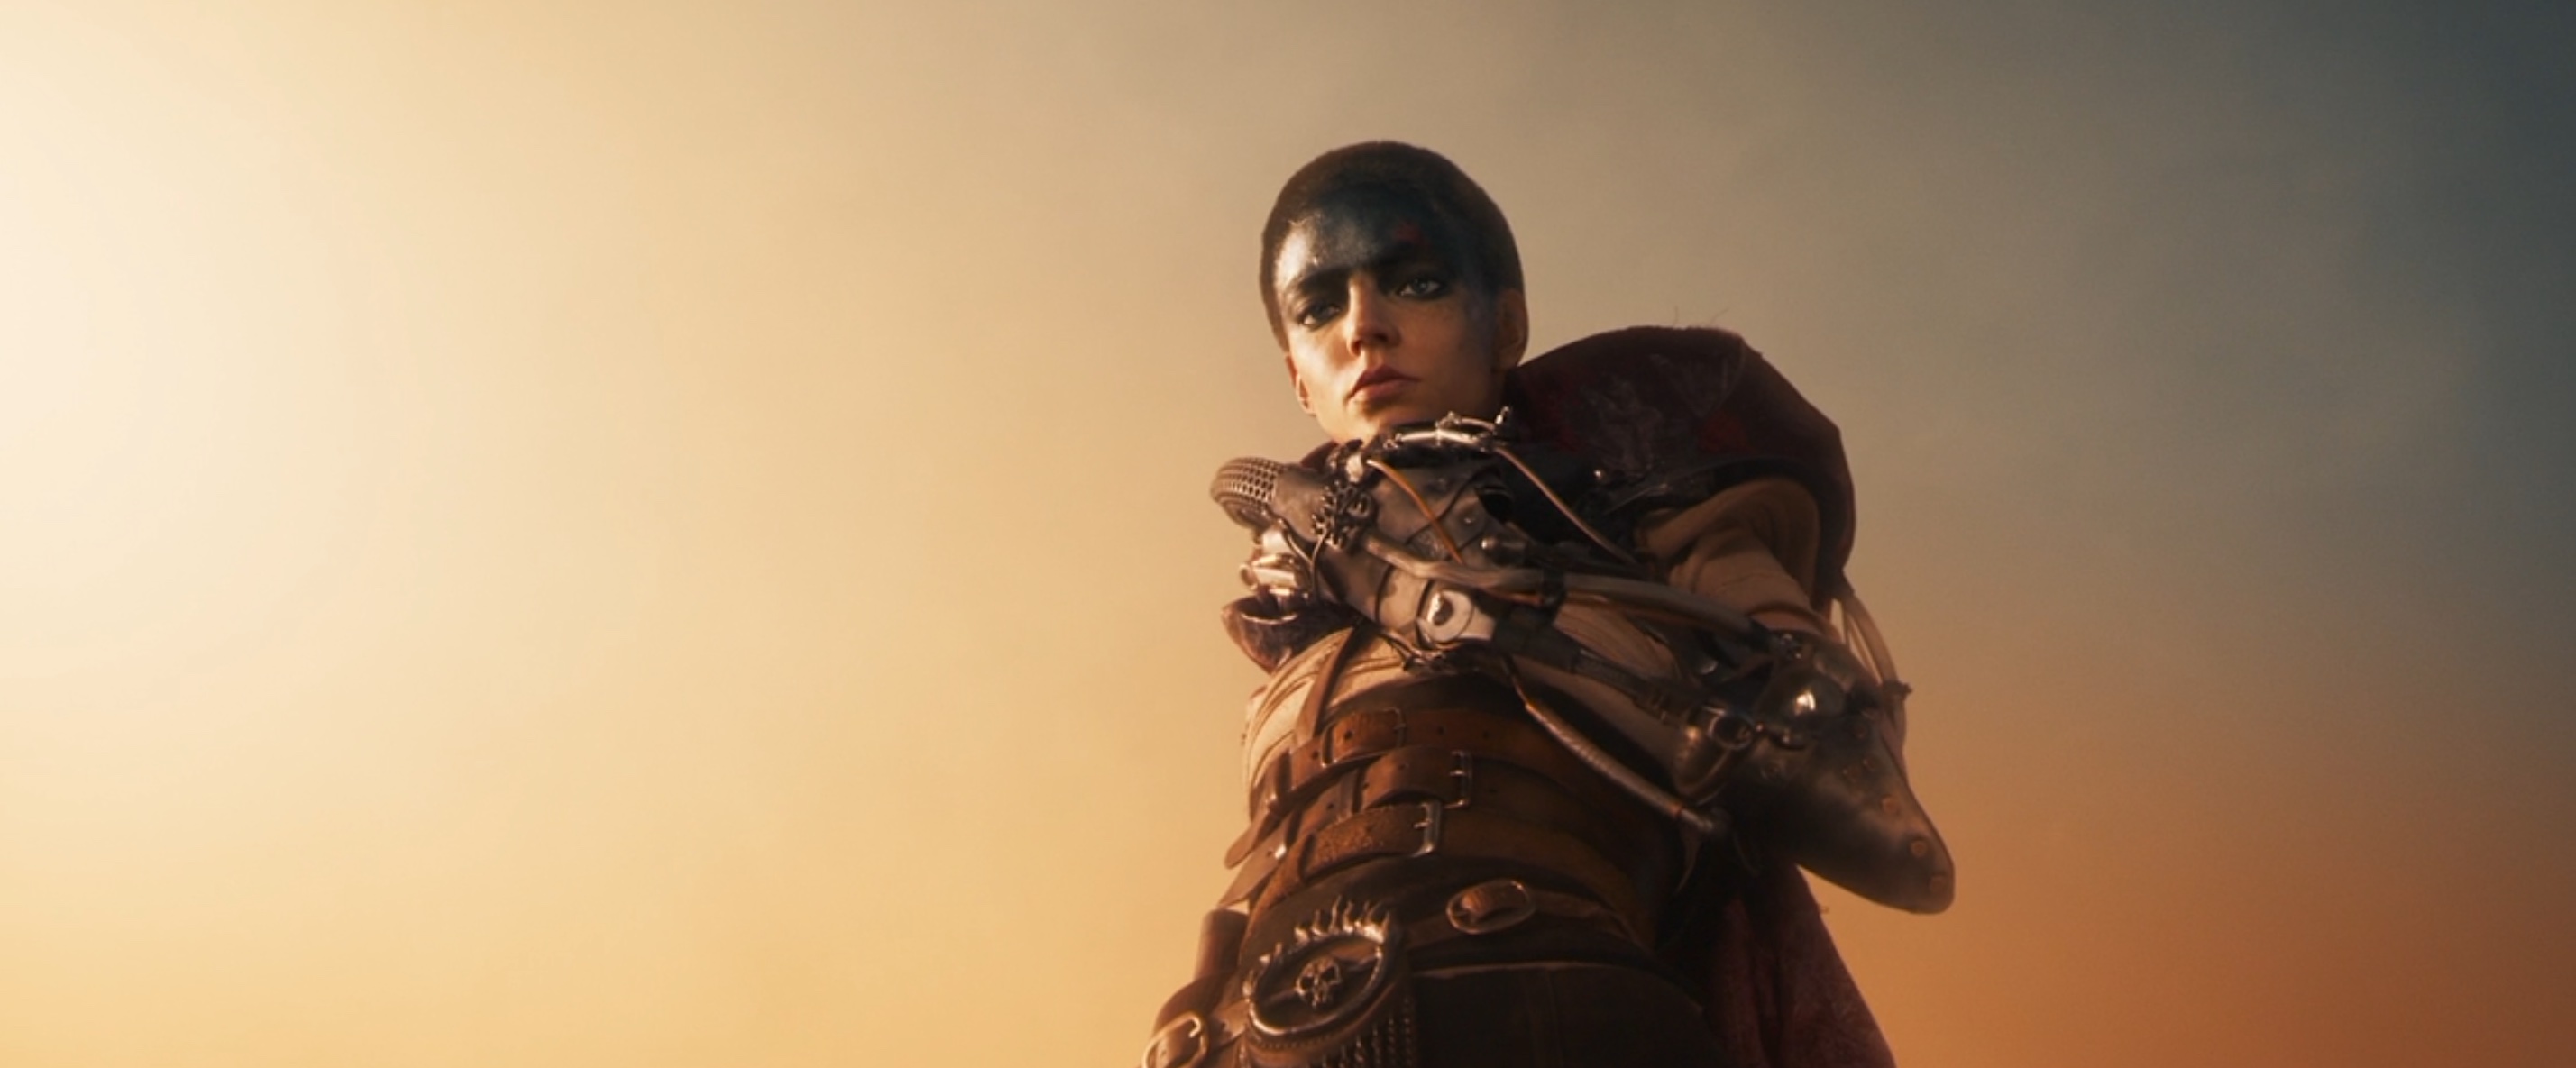 Furiosa (Anya Taylor-Joy) stands above the camera, glowering down into the lens, in George Miller’s Furiosa